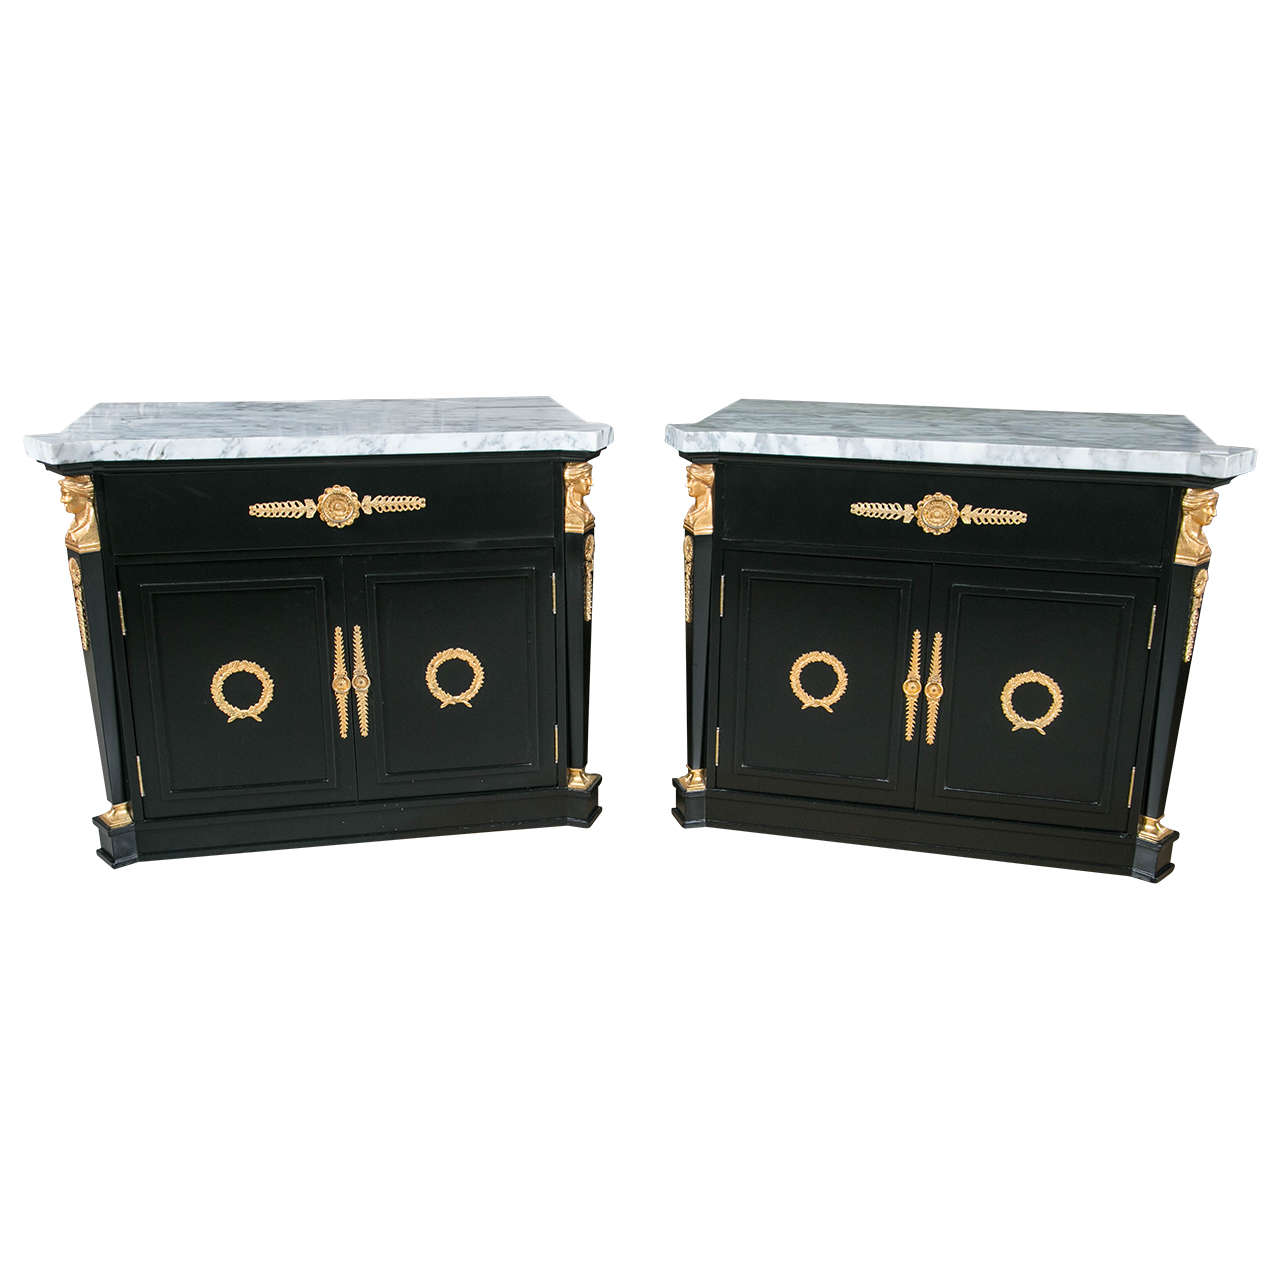 Pair of Ebonized Bronze Mounted End Tables/Night Stands